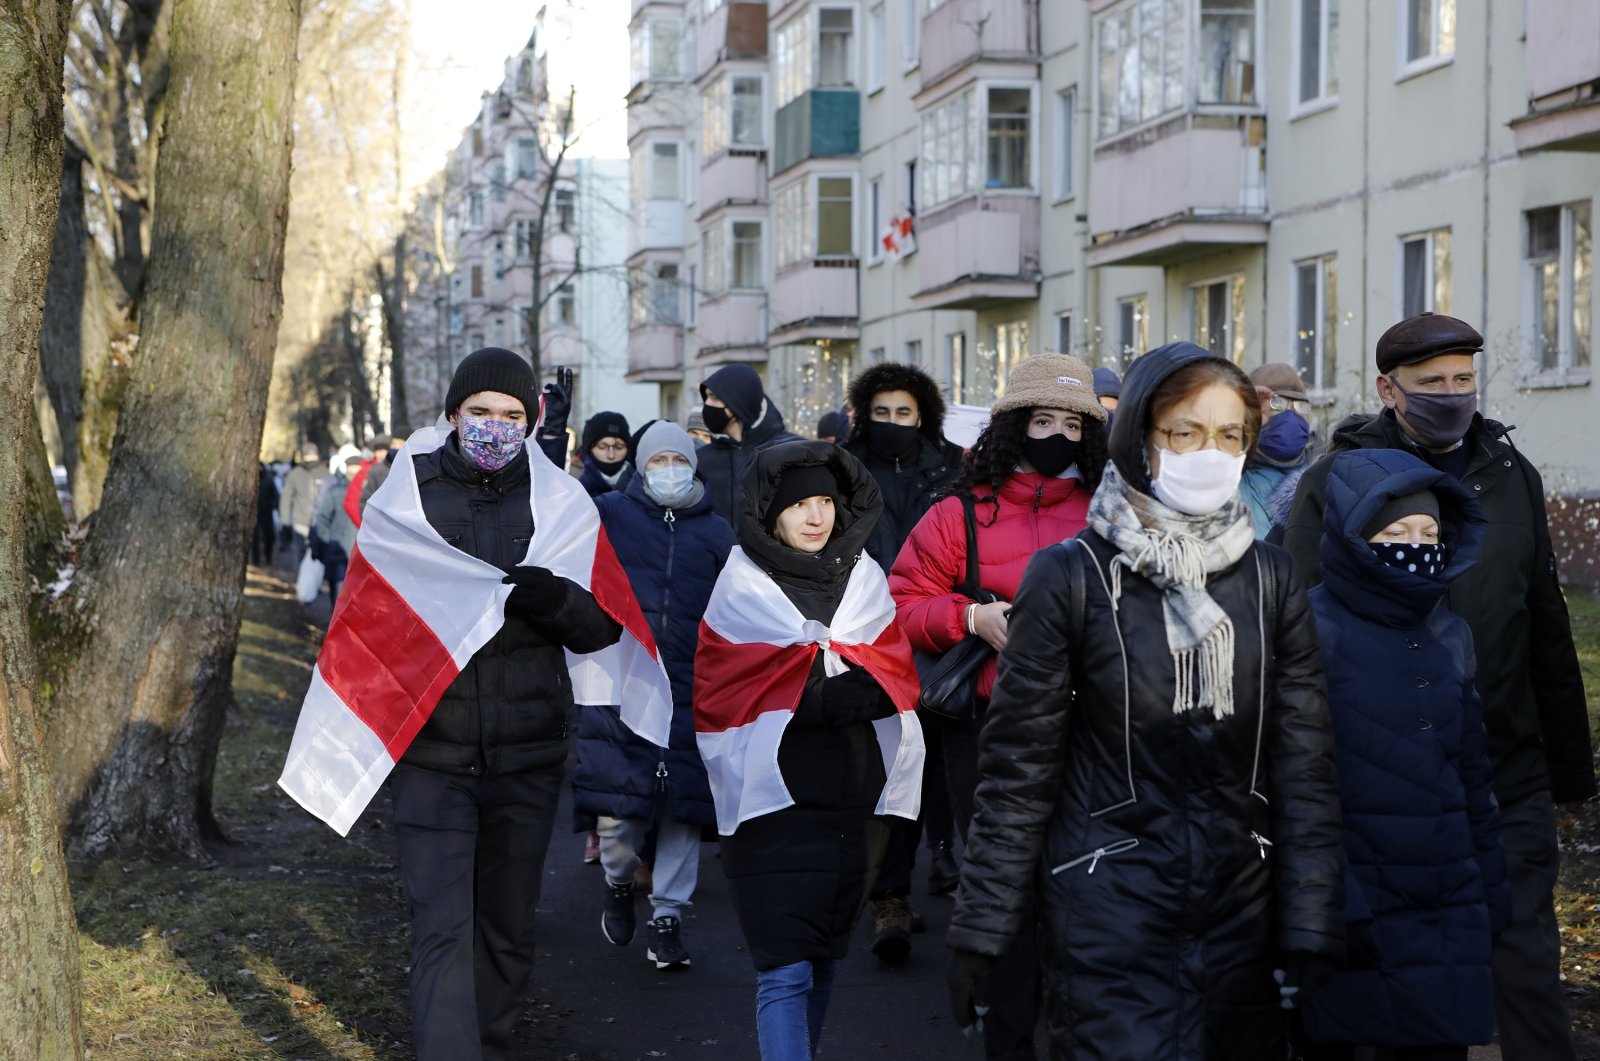 Demonstrators, most of them wearing face masks to help curb the spread of the coronavirus, attend an opposition rally to protest the official presidential election results in Minsk, Belarus, Dec. 6, 2020. (AP Photo)